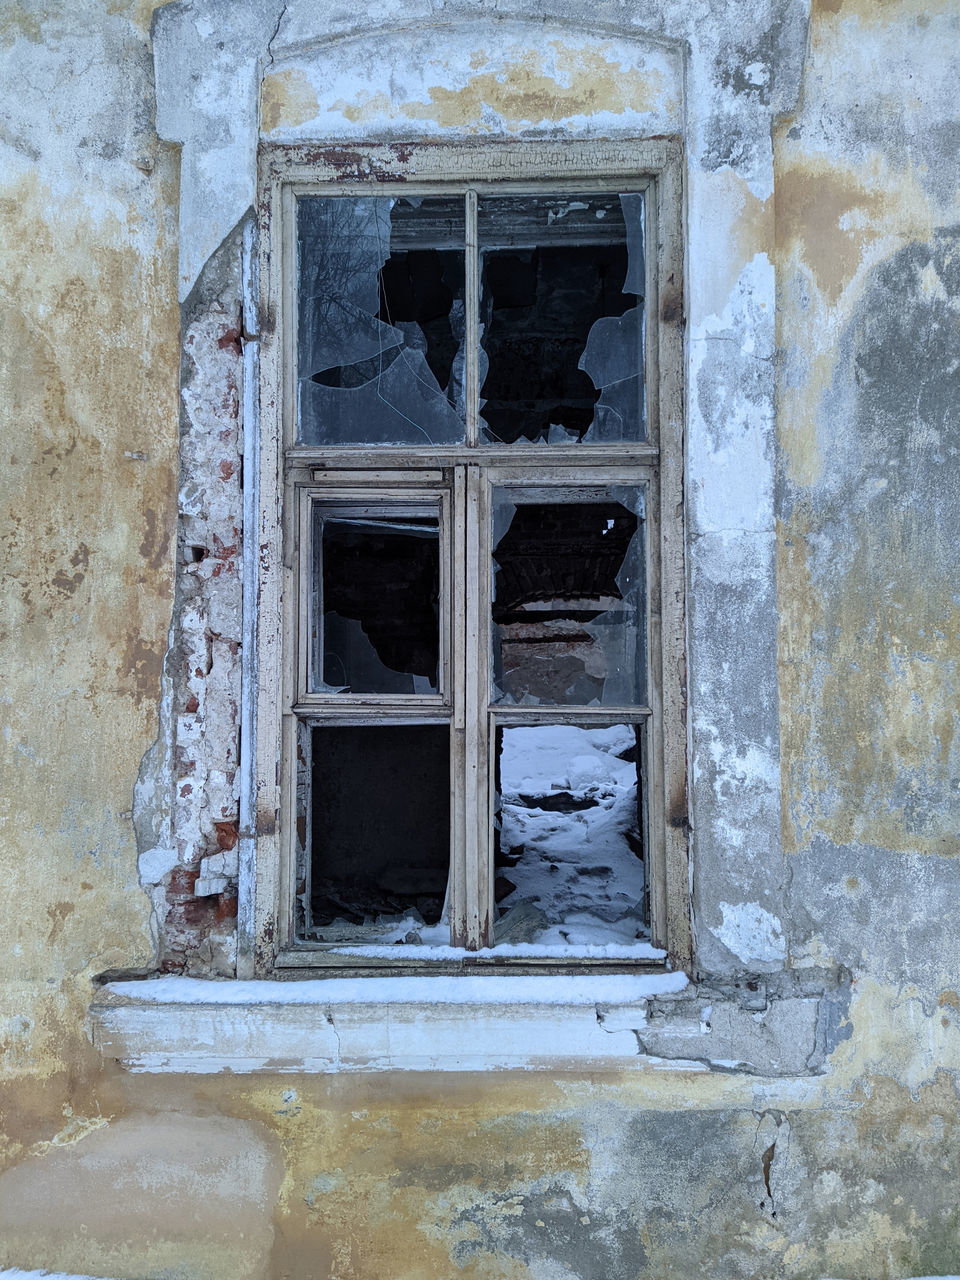 architecture, built structure, window, building exterior, building, wall, old, no people, damaged, abandoned, wall - building feature, house, history, weathered, day, door, entrance, blue, ancient history, the past, outdoors, decline, deterioration, rundown, bad condition, ruins, residential district, iron, broken, closed